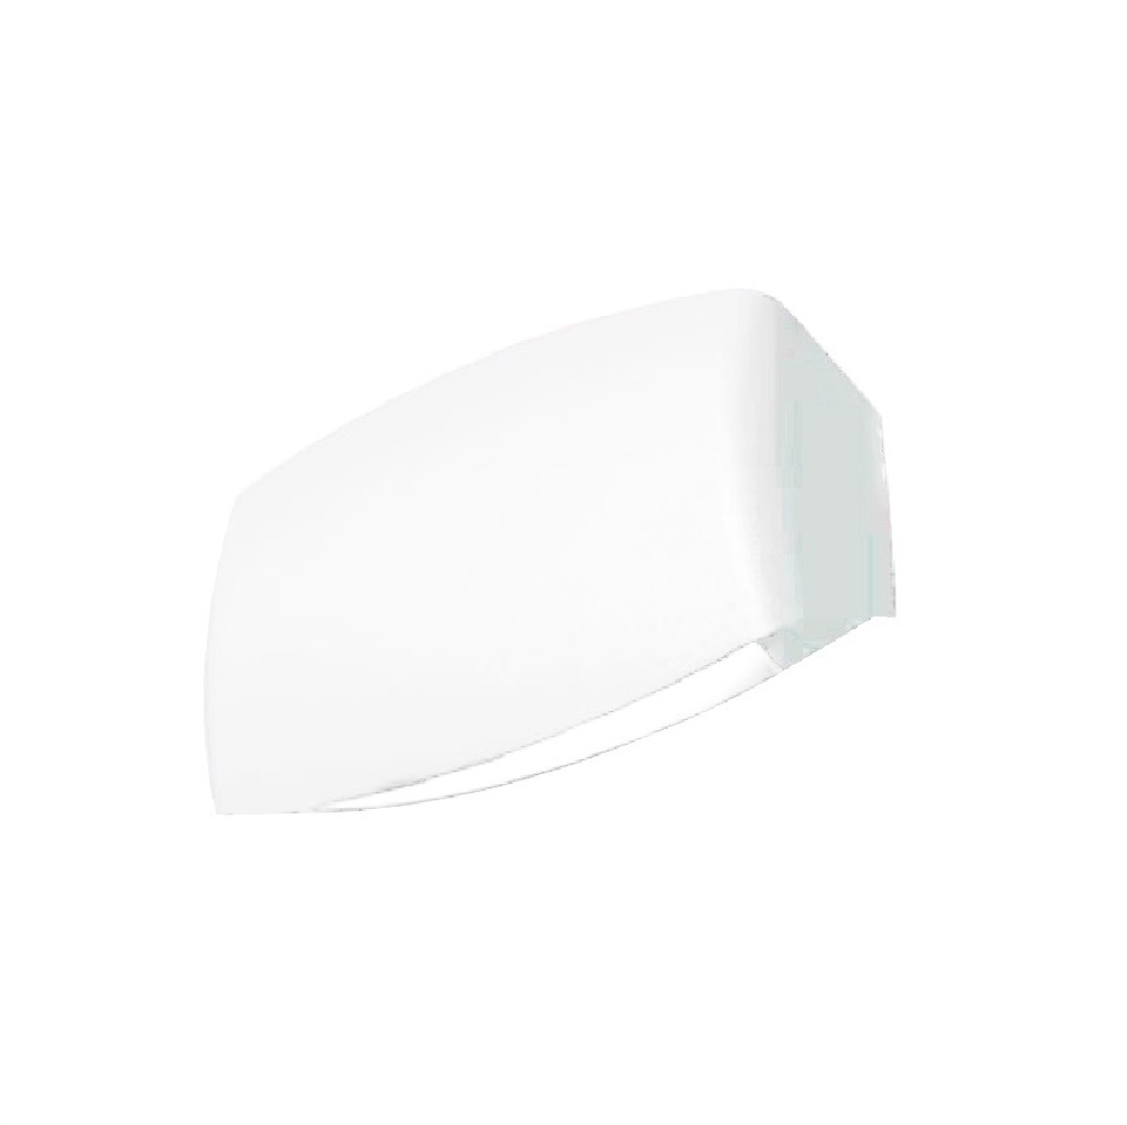 FUMAGALLI - ABRAM190 LED 8.5W Up&Down Light with Clear Diffuser (White) (4000K)